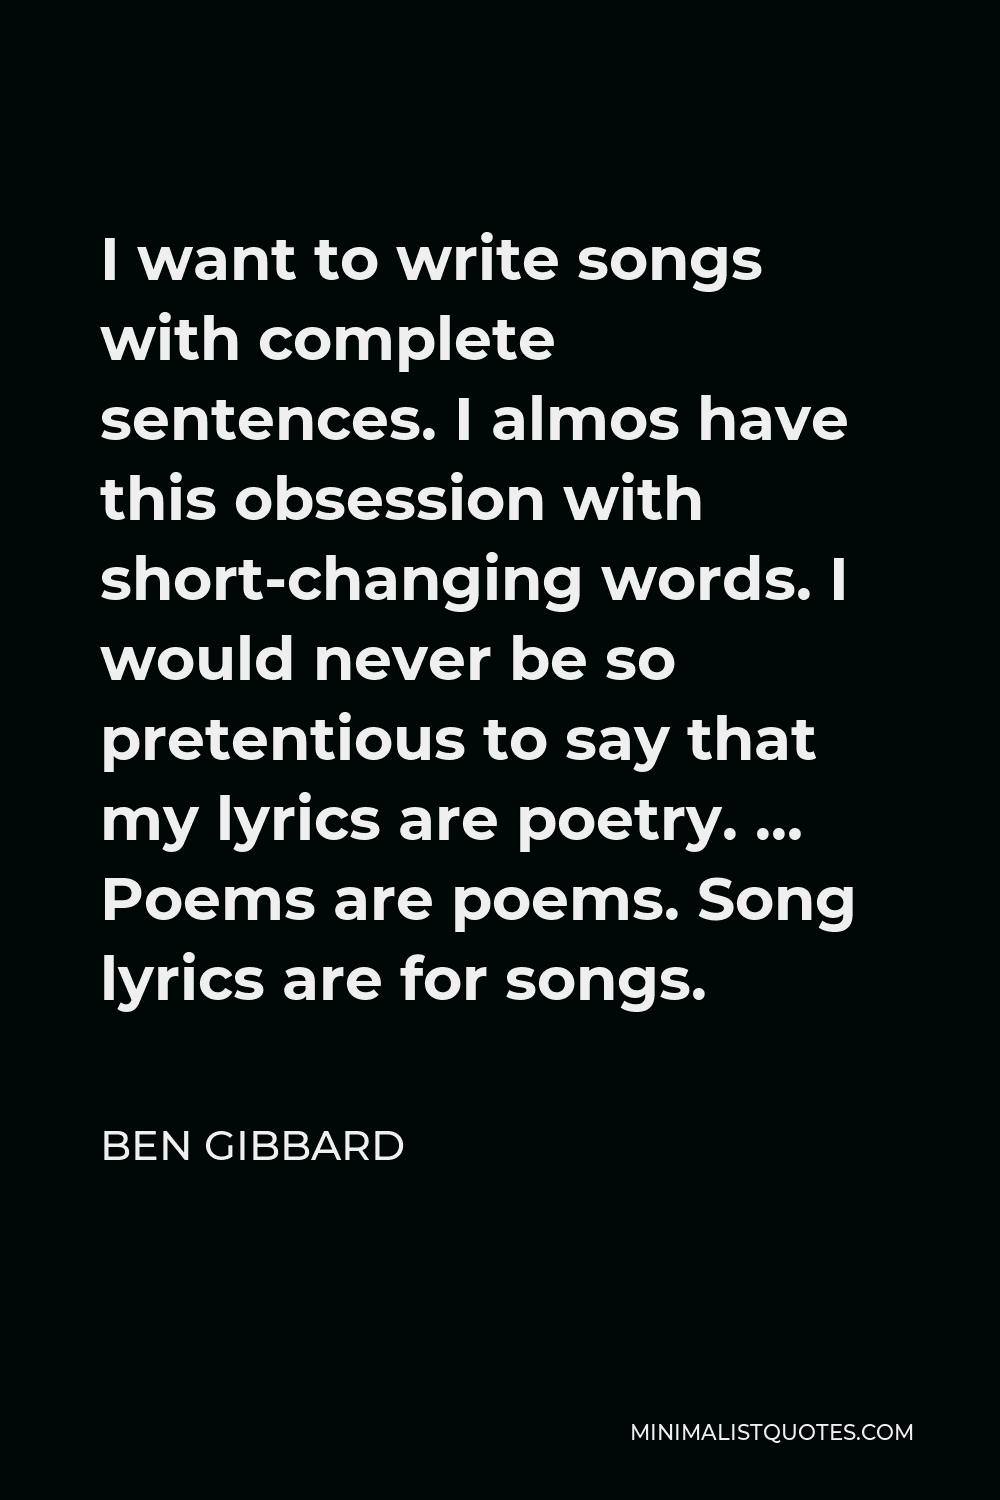 Ben Gibbard Quote - I want to write songs with complete sentences. I almos have this obsession with short-changing words. I would never be so pretentious to say that my lyrics are poetry. … Poems are poems. Song lyrics are for songs.